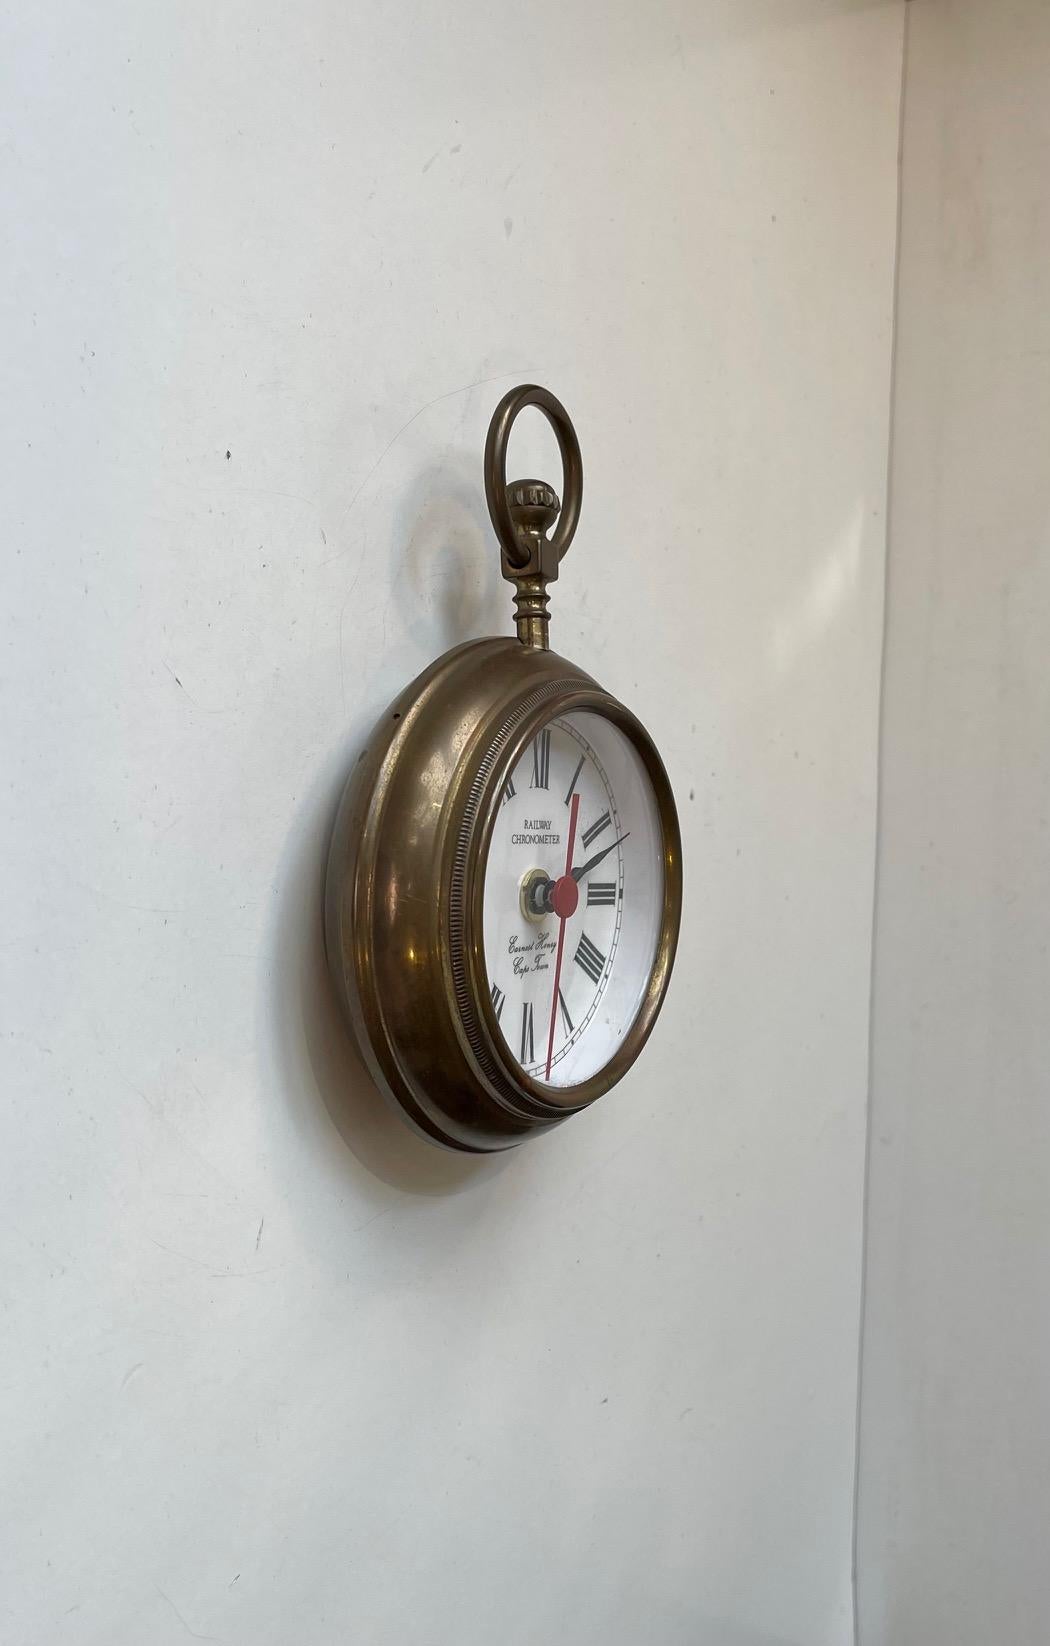 Midcentury novelty Jumbo Pocket Watch or small Wall Clock. It is called Railway Chronometer. The case, crown and ring/crown guard is fashioned from brass. Dial with Roman numerals and the manufacturer name: Earnest Henry - Cape Town. It was made